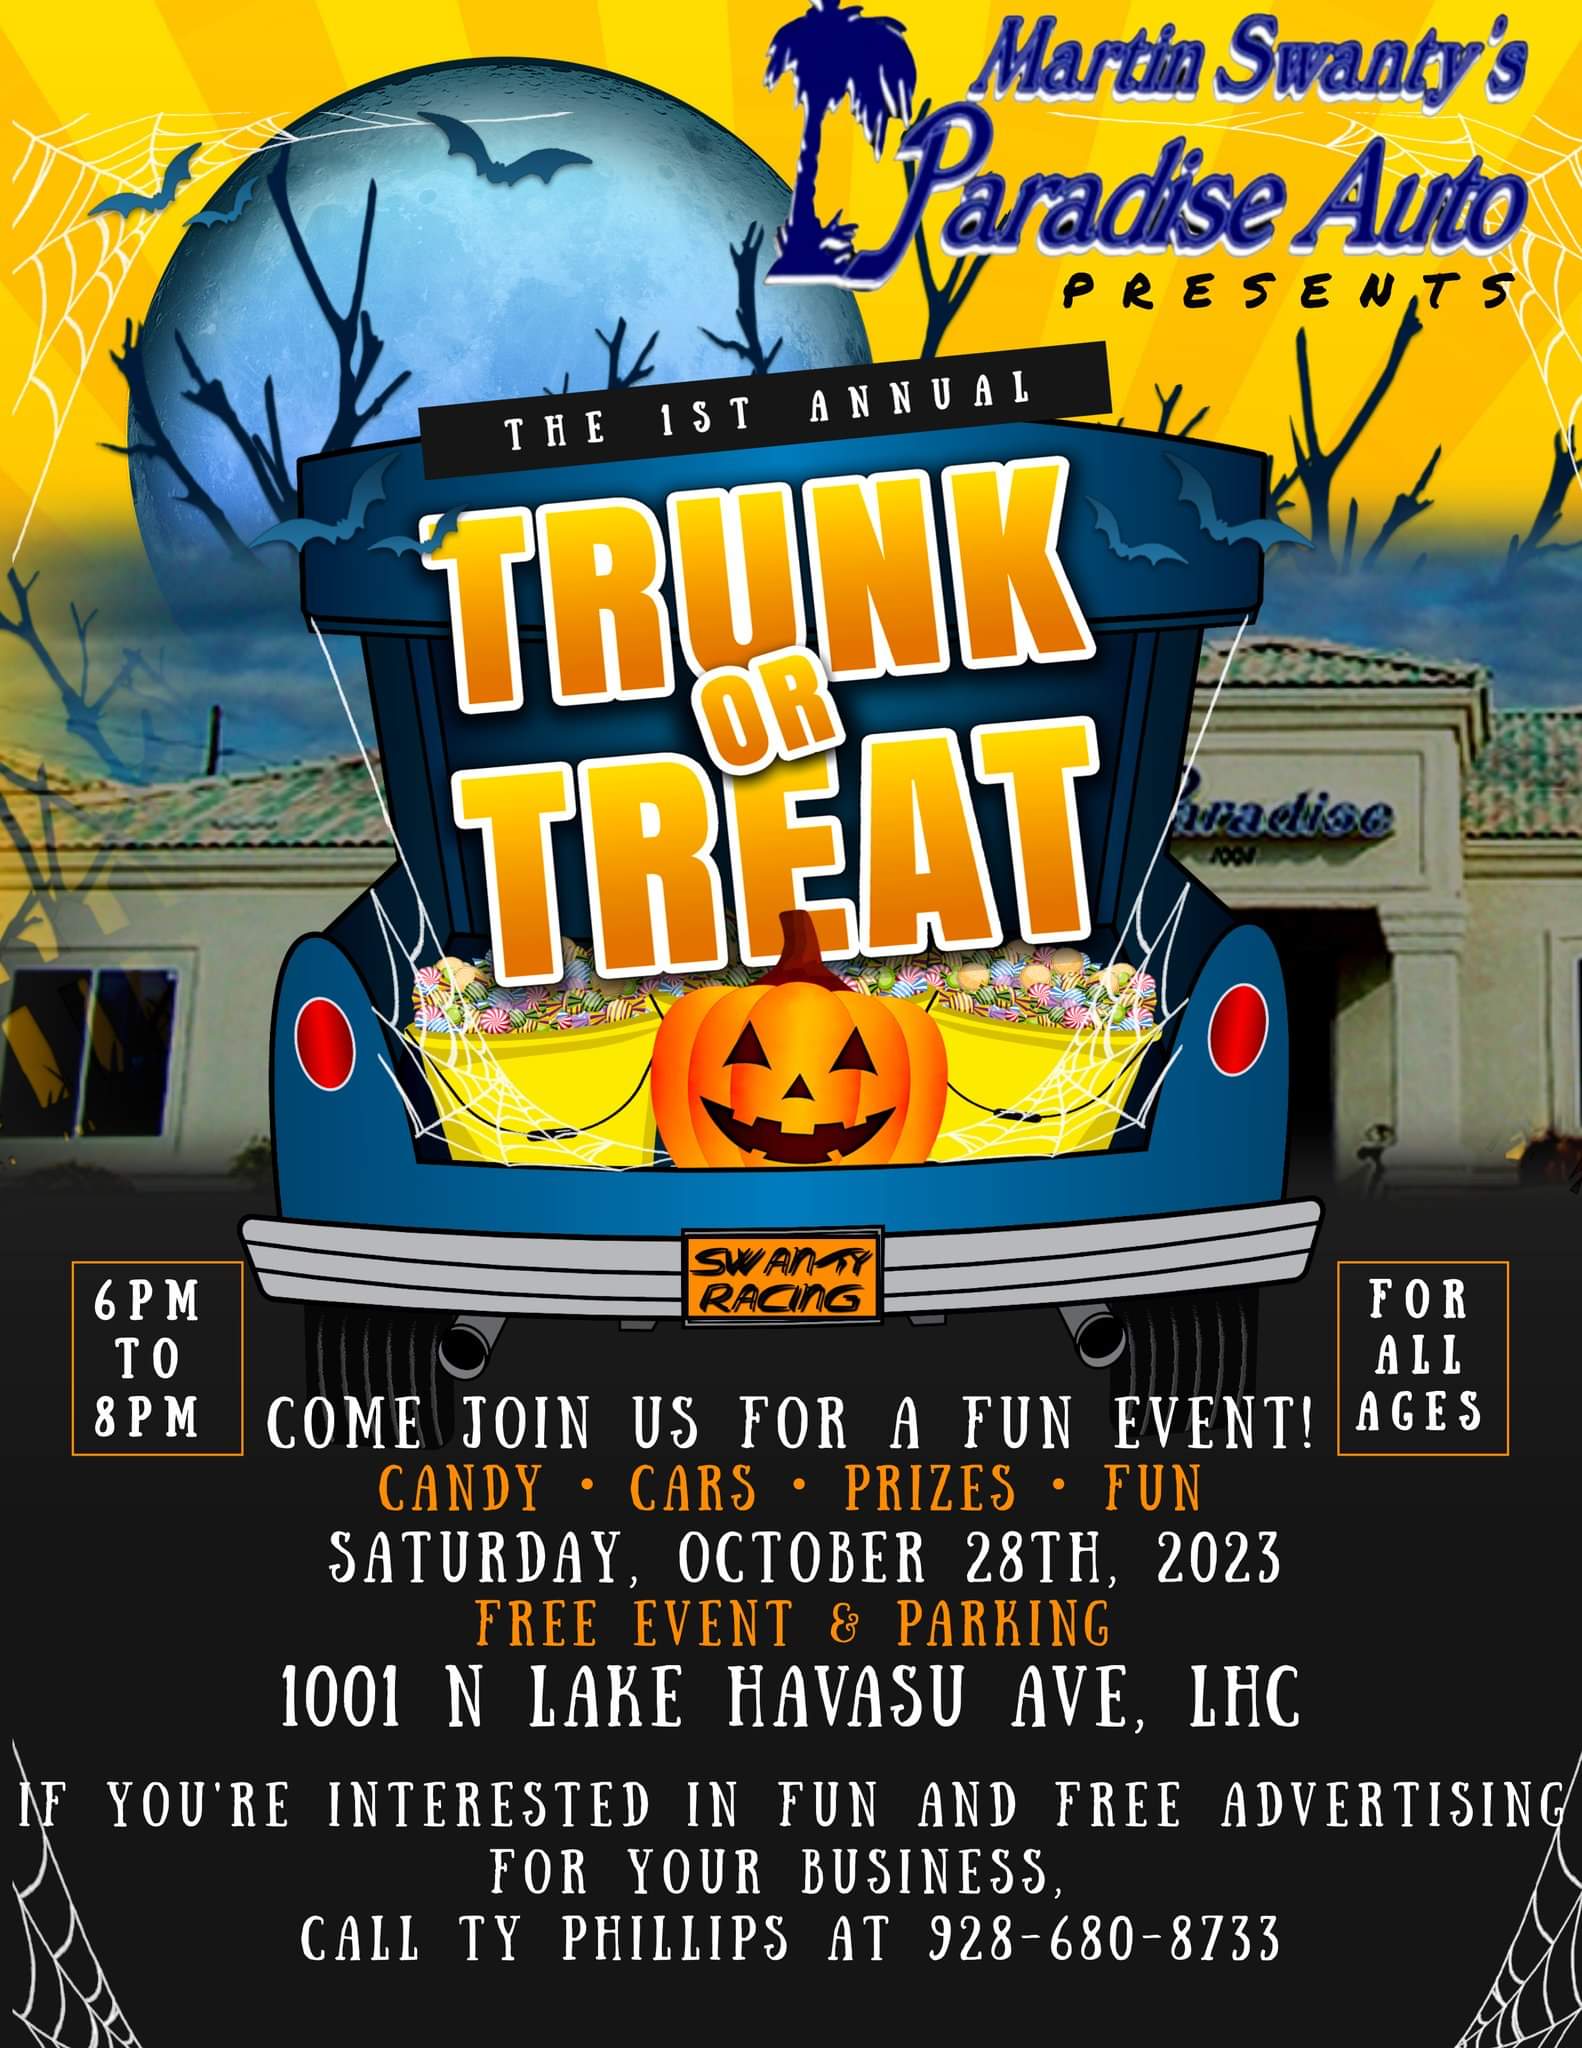 Paradise Auto Trunk Or Treat Event